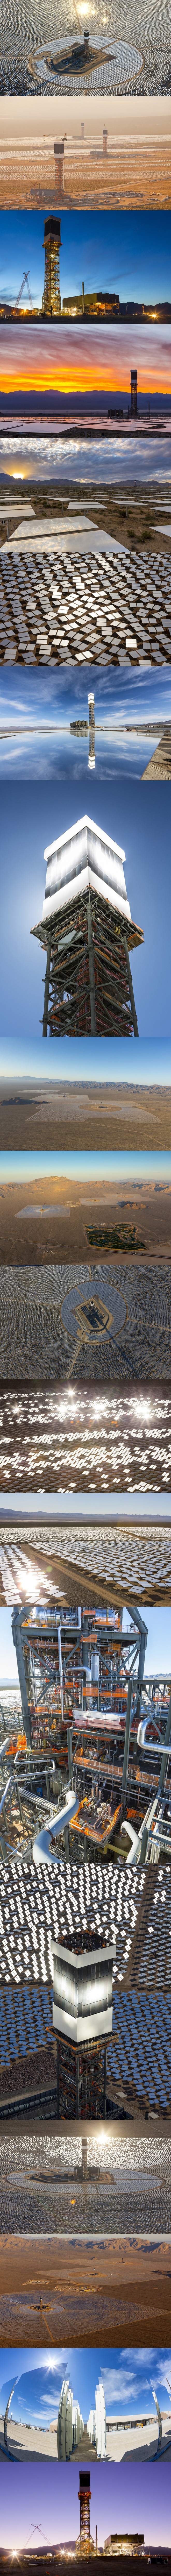 The Largest Solar Plant In The World